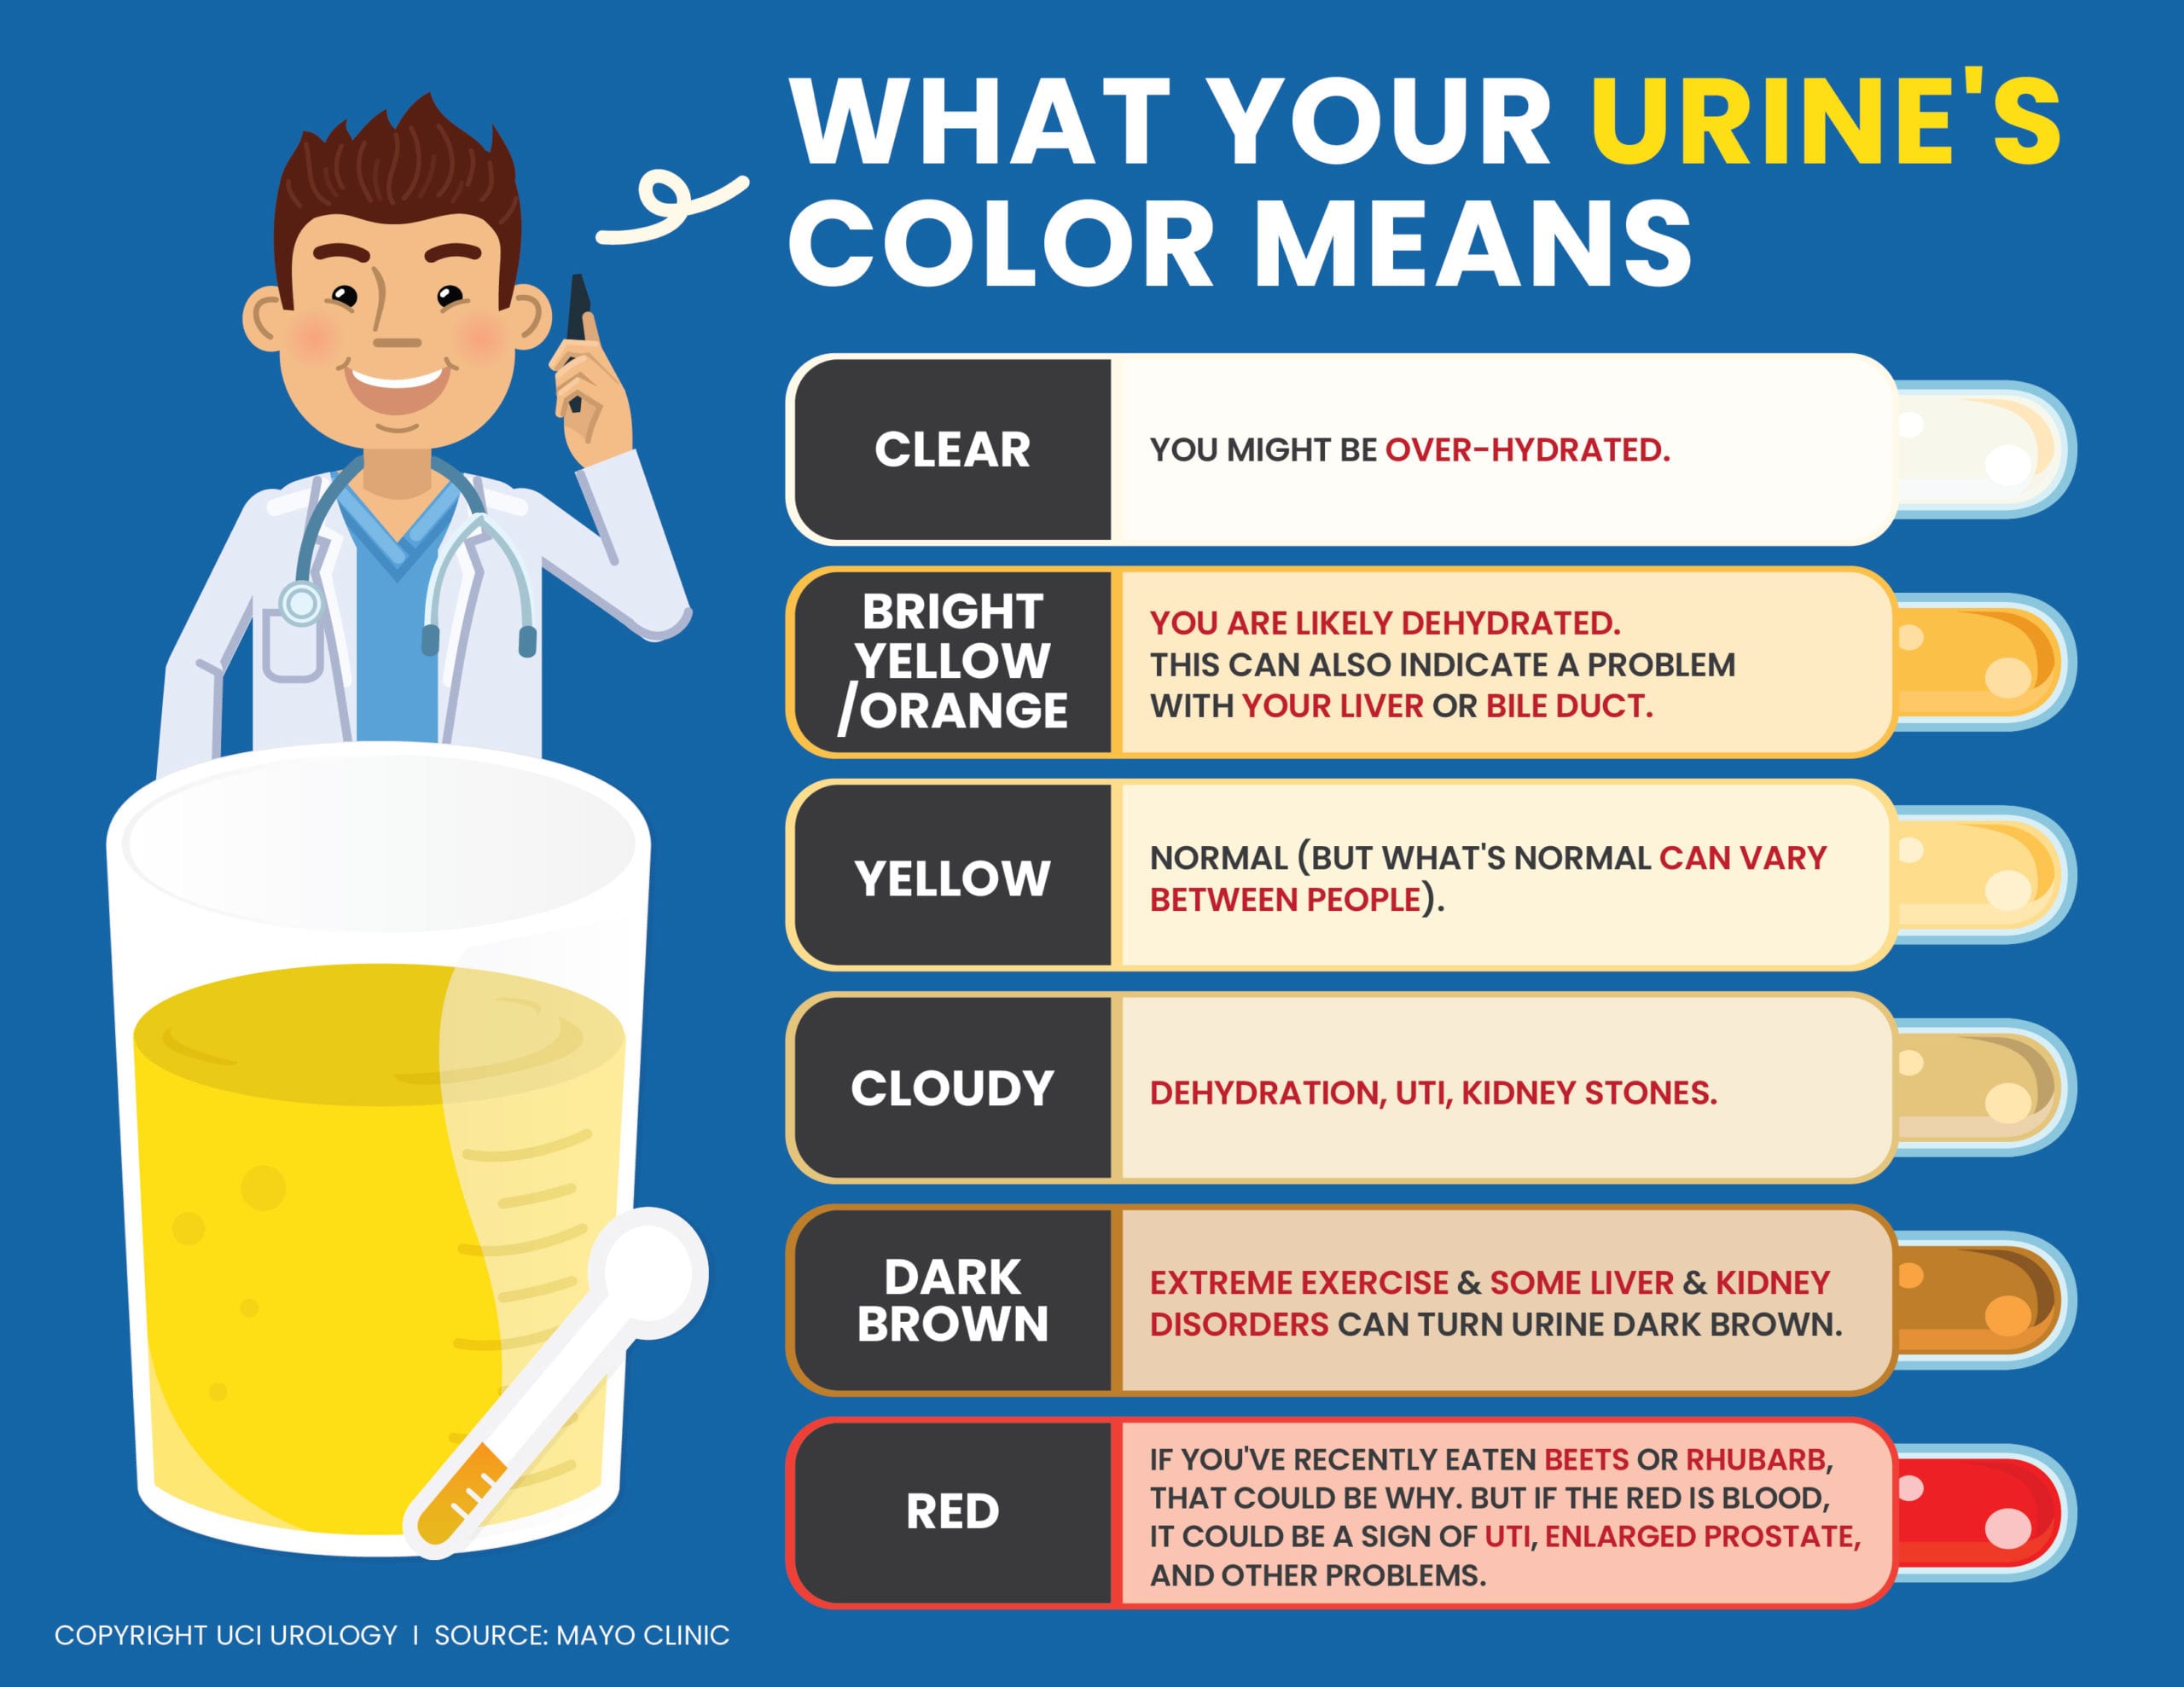 urine color chart - an infographic showing what your urine’s color could mean